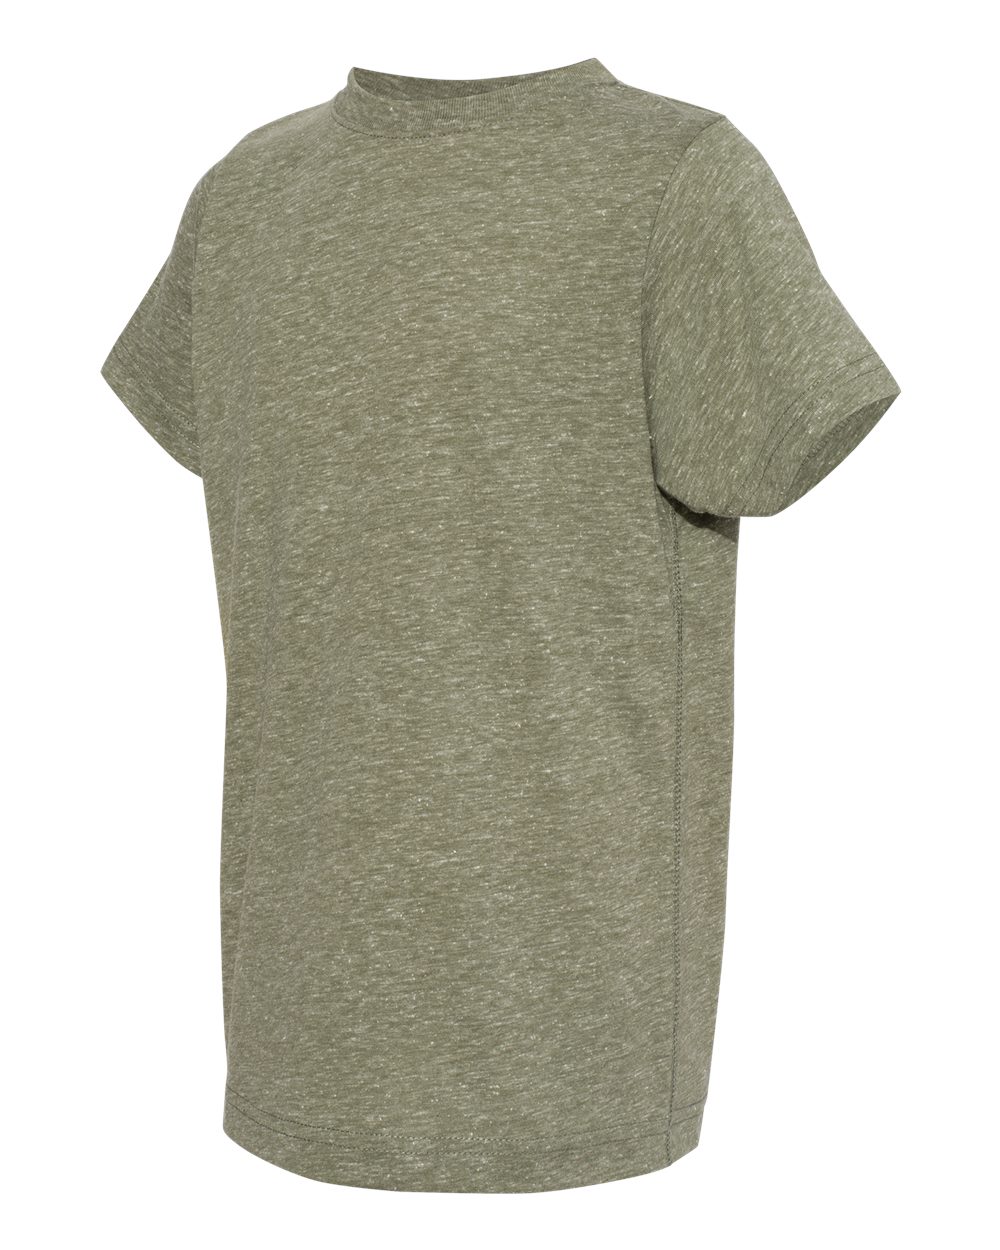 click to view Military Green Melange